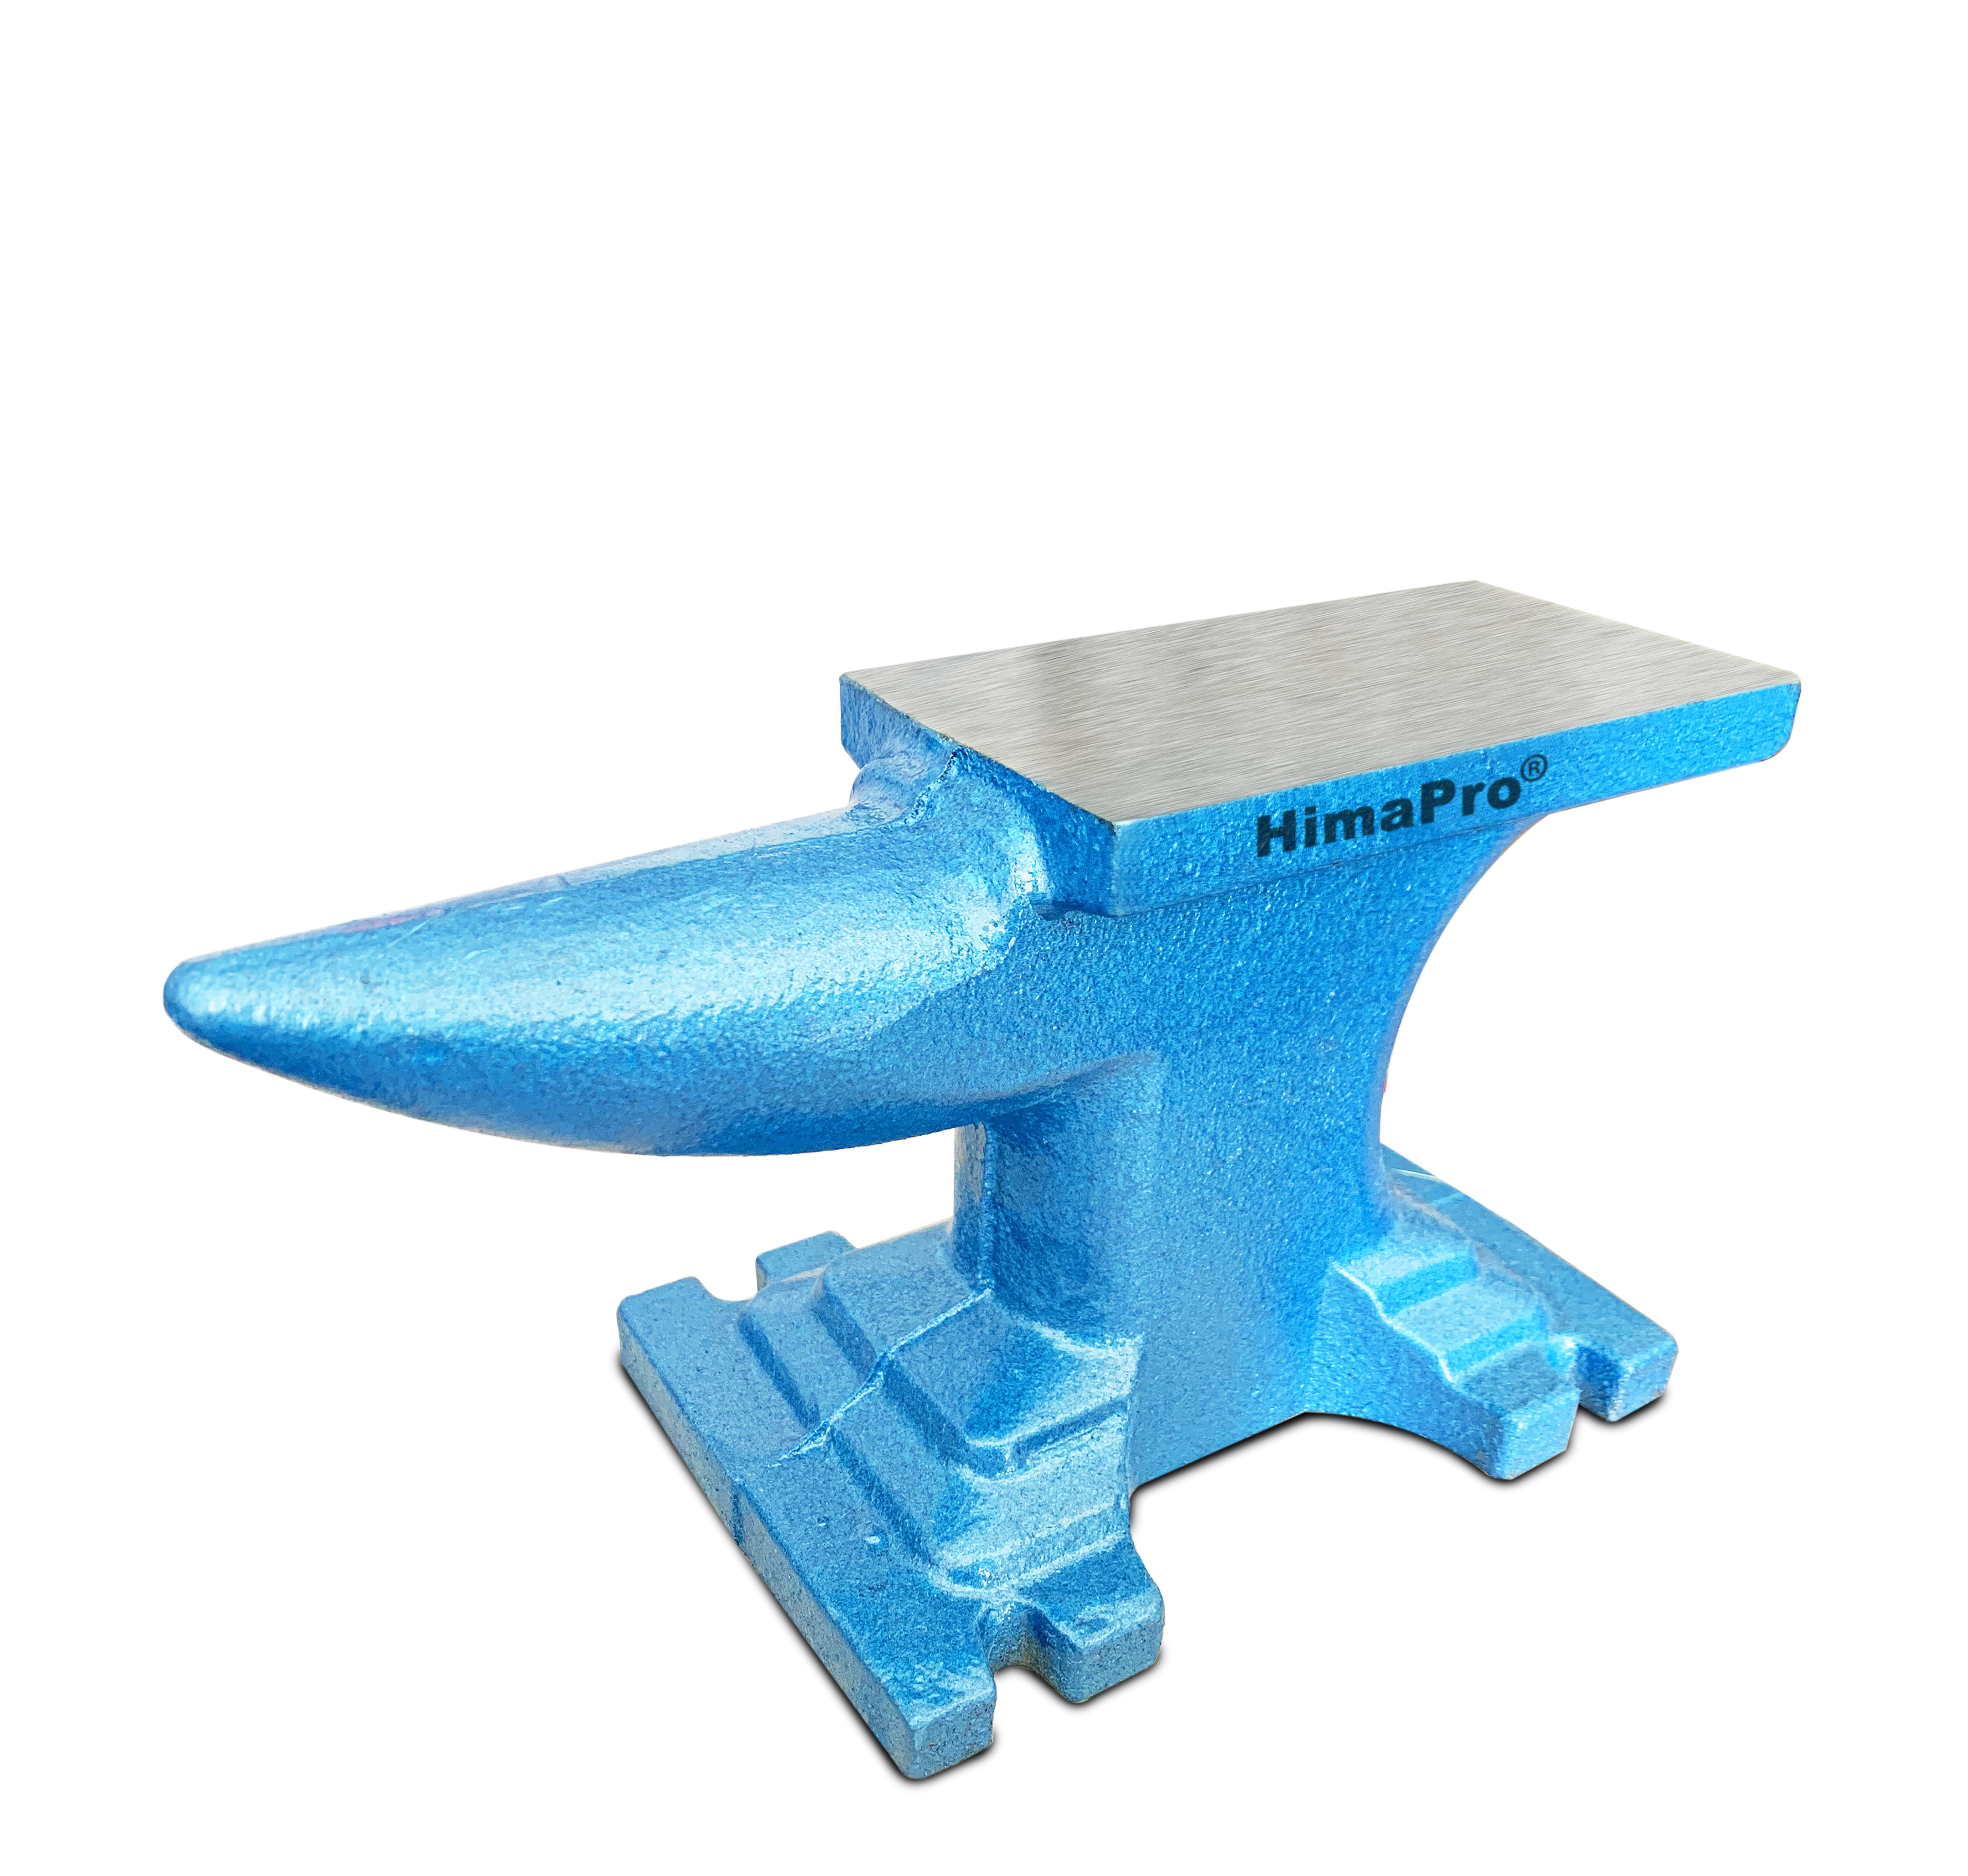 HimaPro Single Horn Anvil for Blacksmith Blue - 11 lbs Cast Iron Anvil - A  Wonderful Tool for Jewelry Making and Metal Stamping